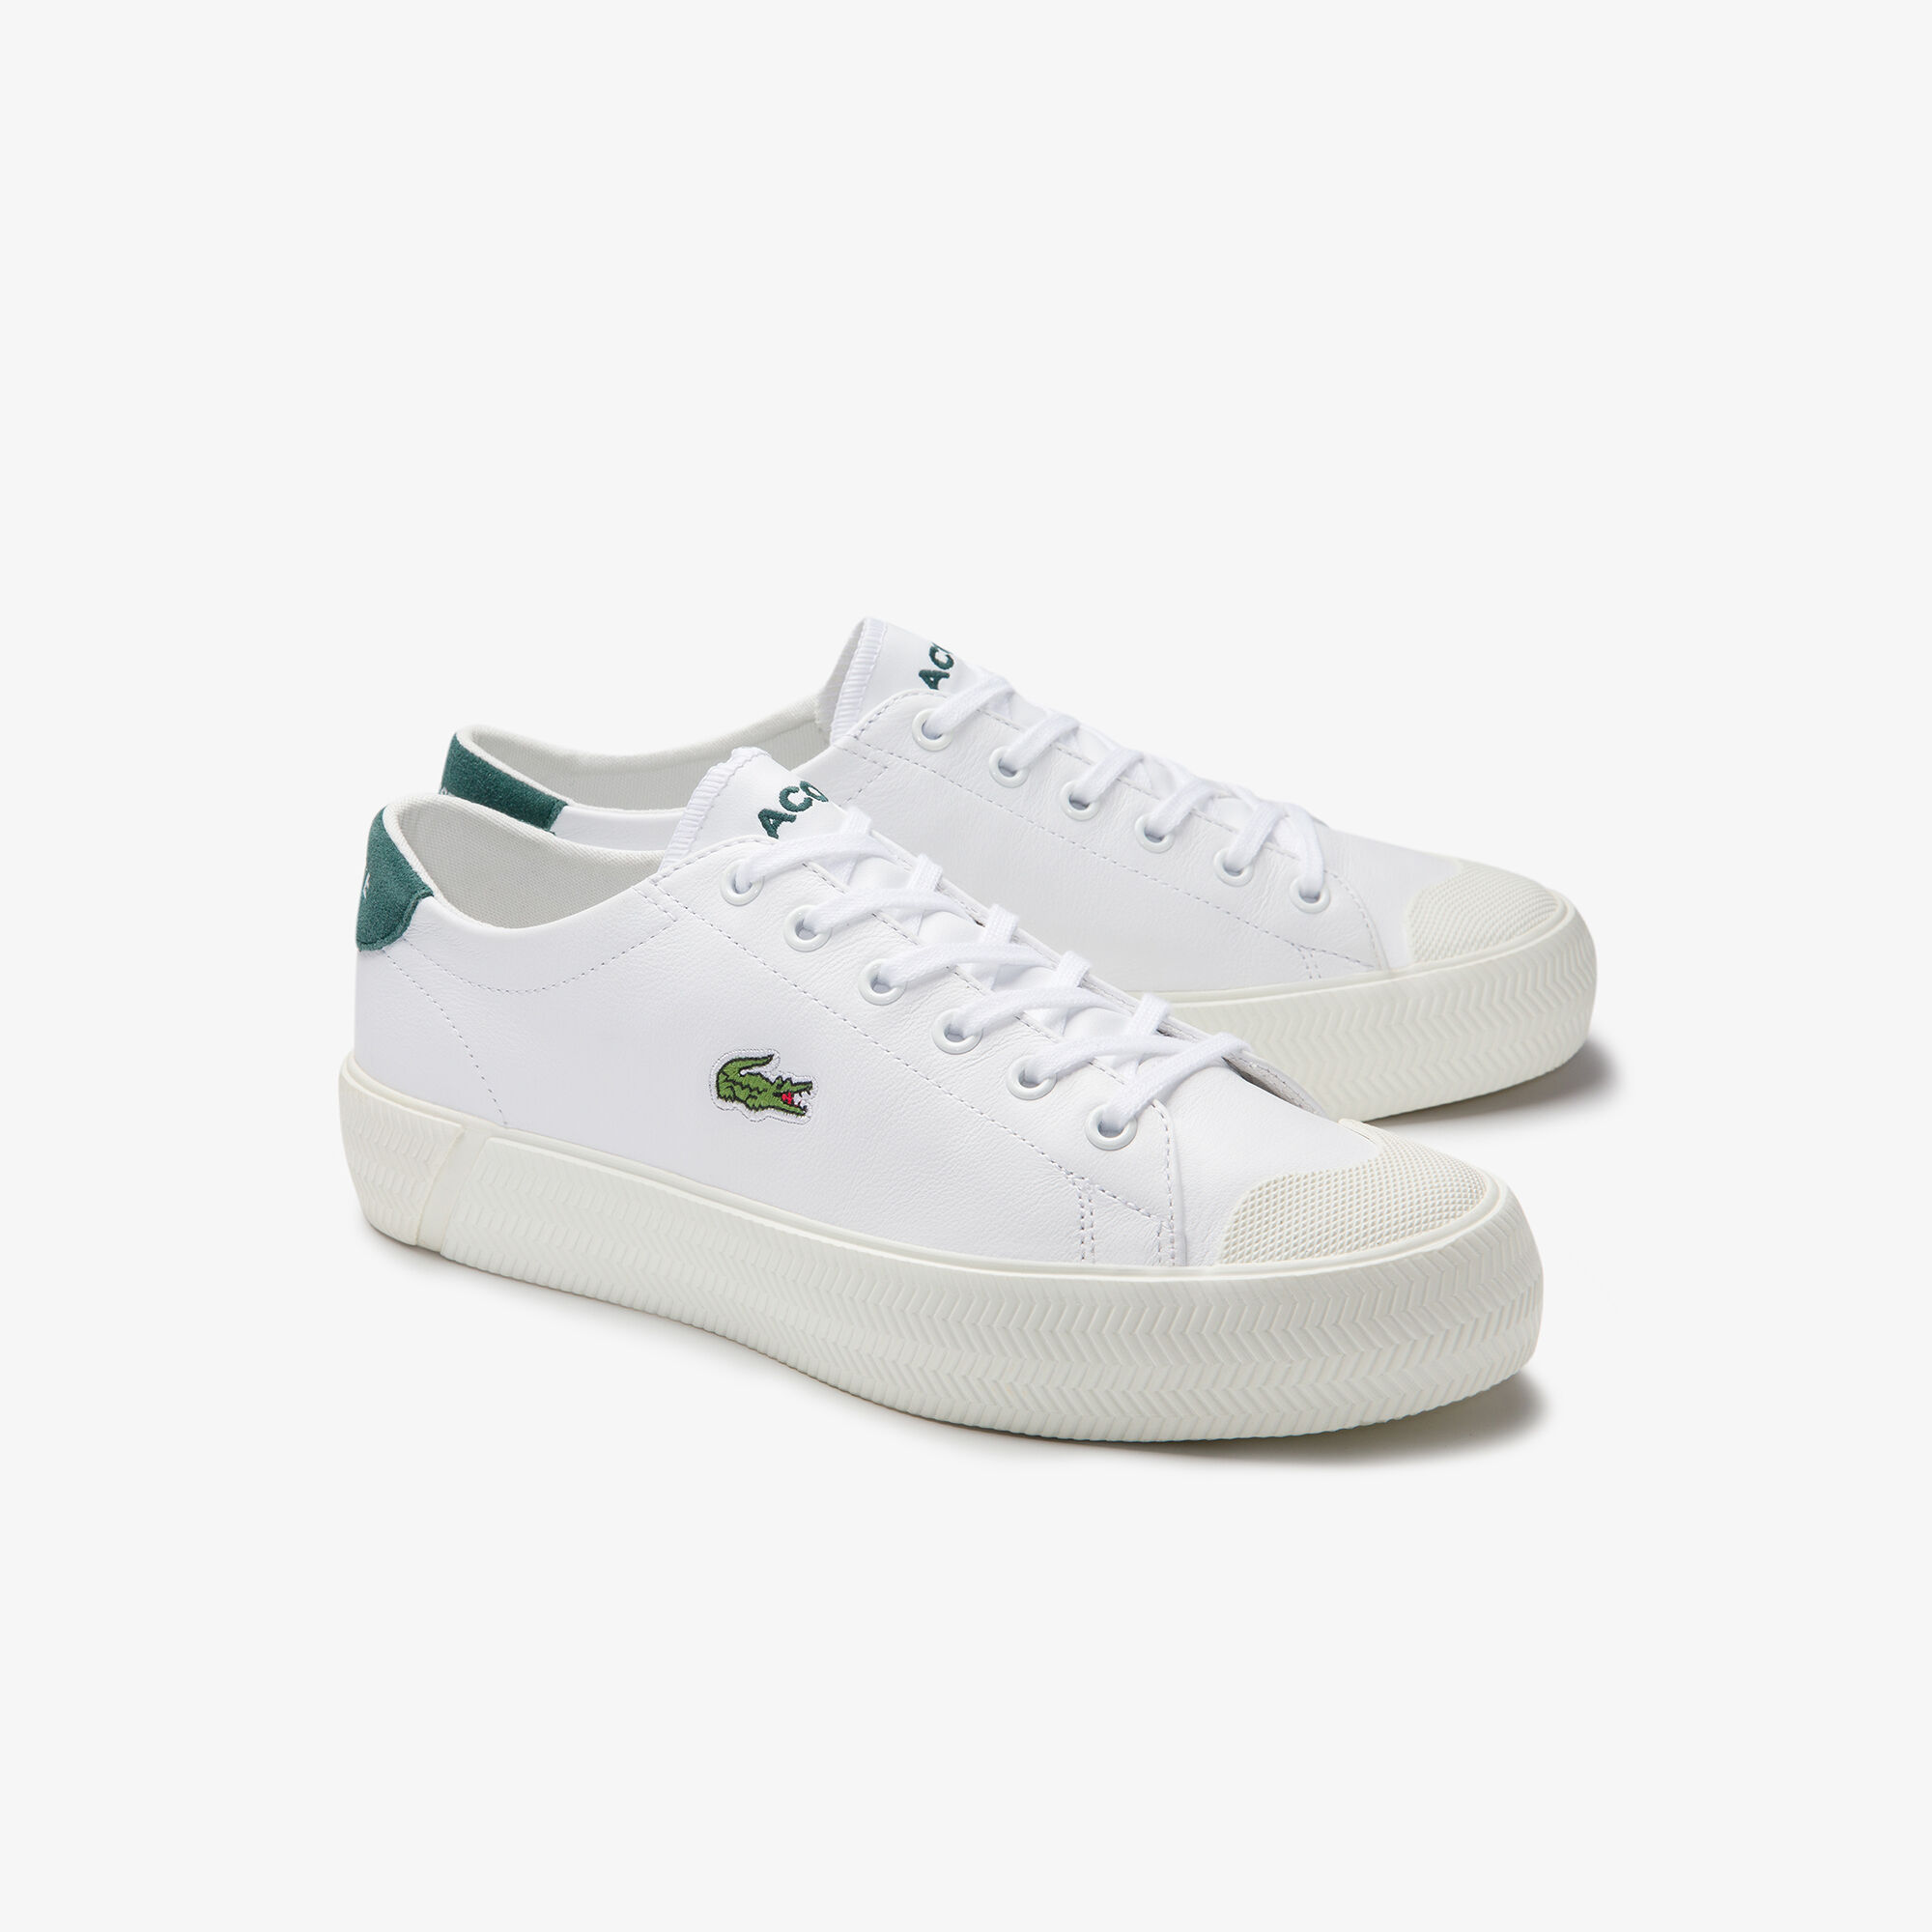 Women's Gripshot Leather and Suede Sneakers